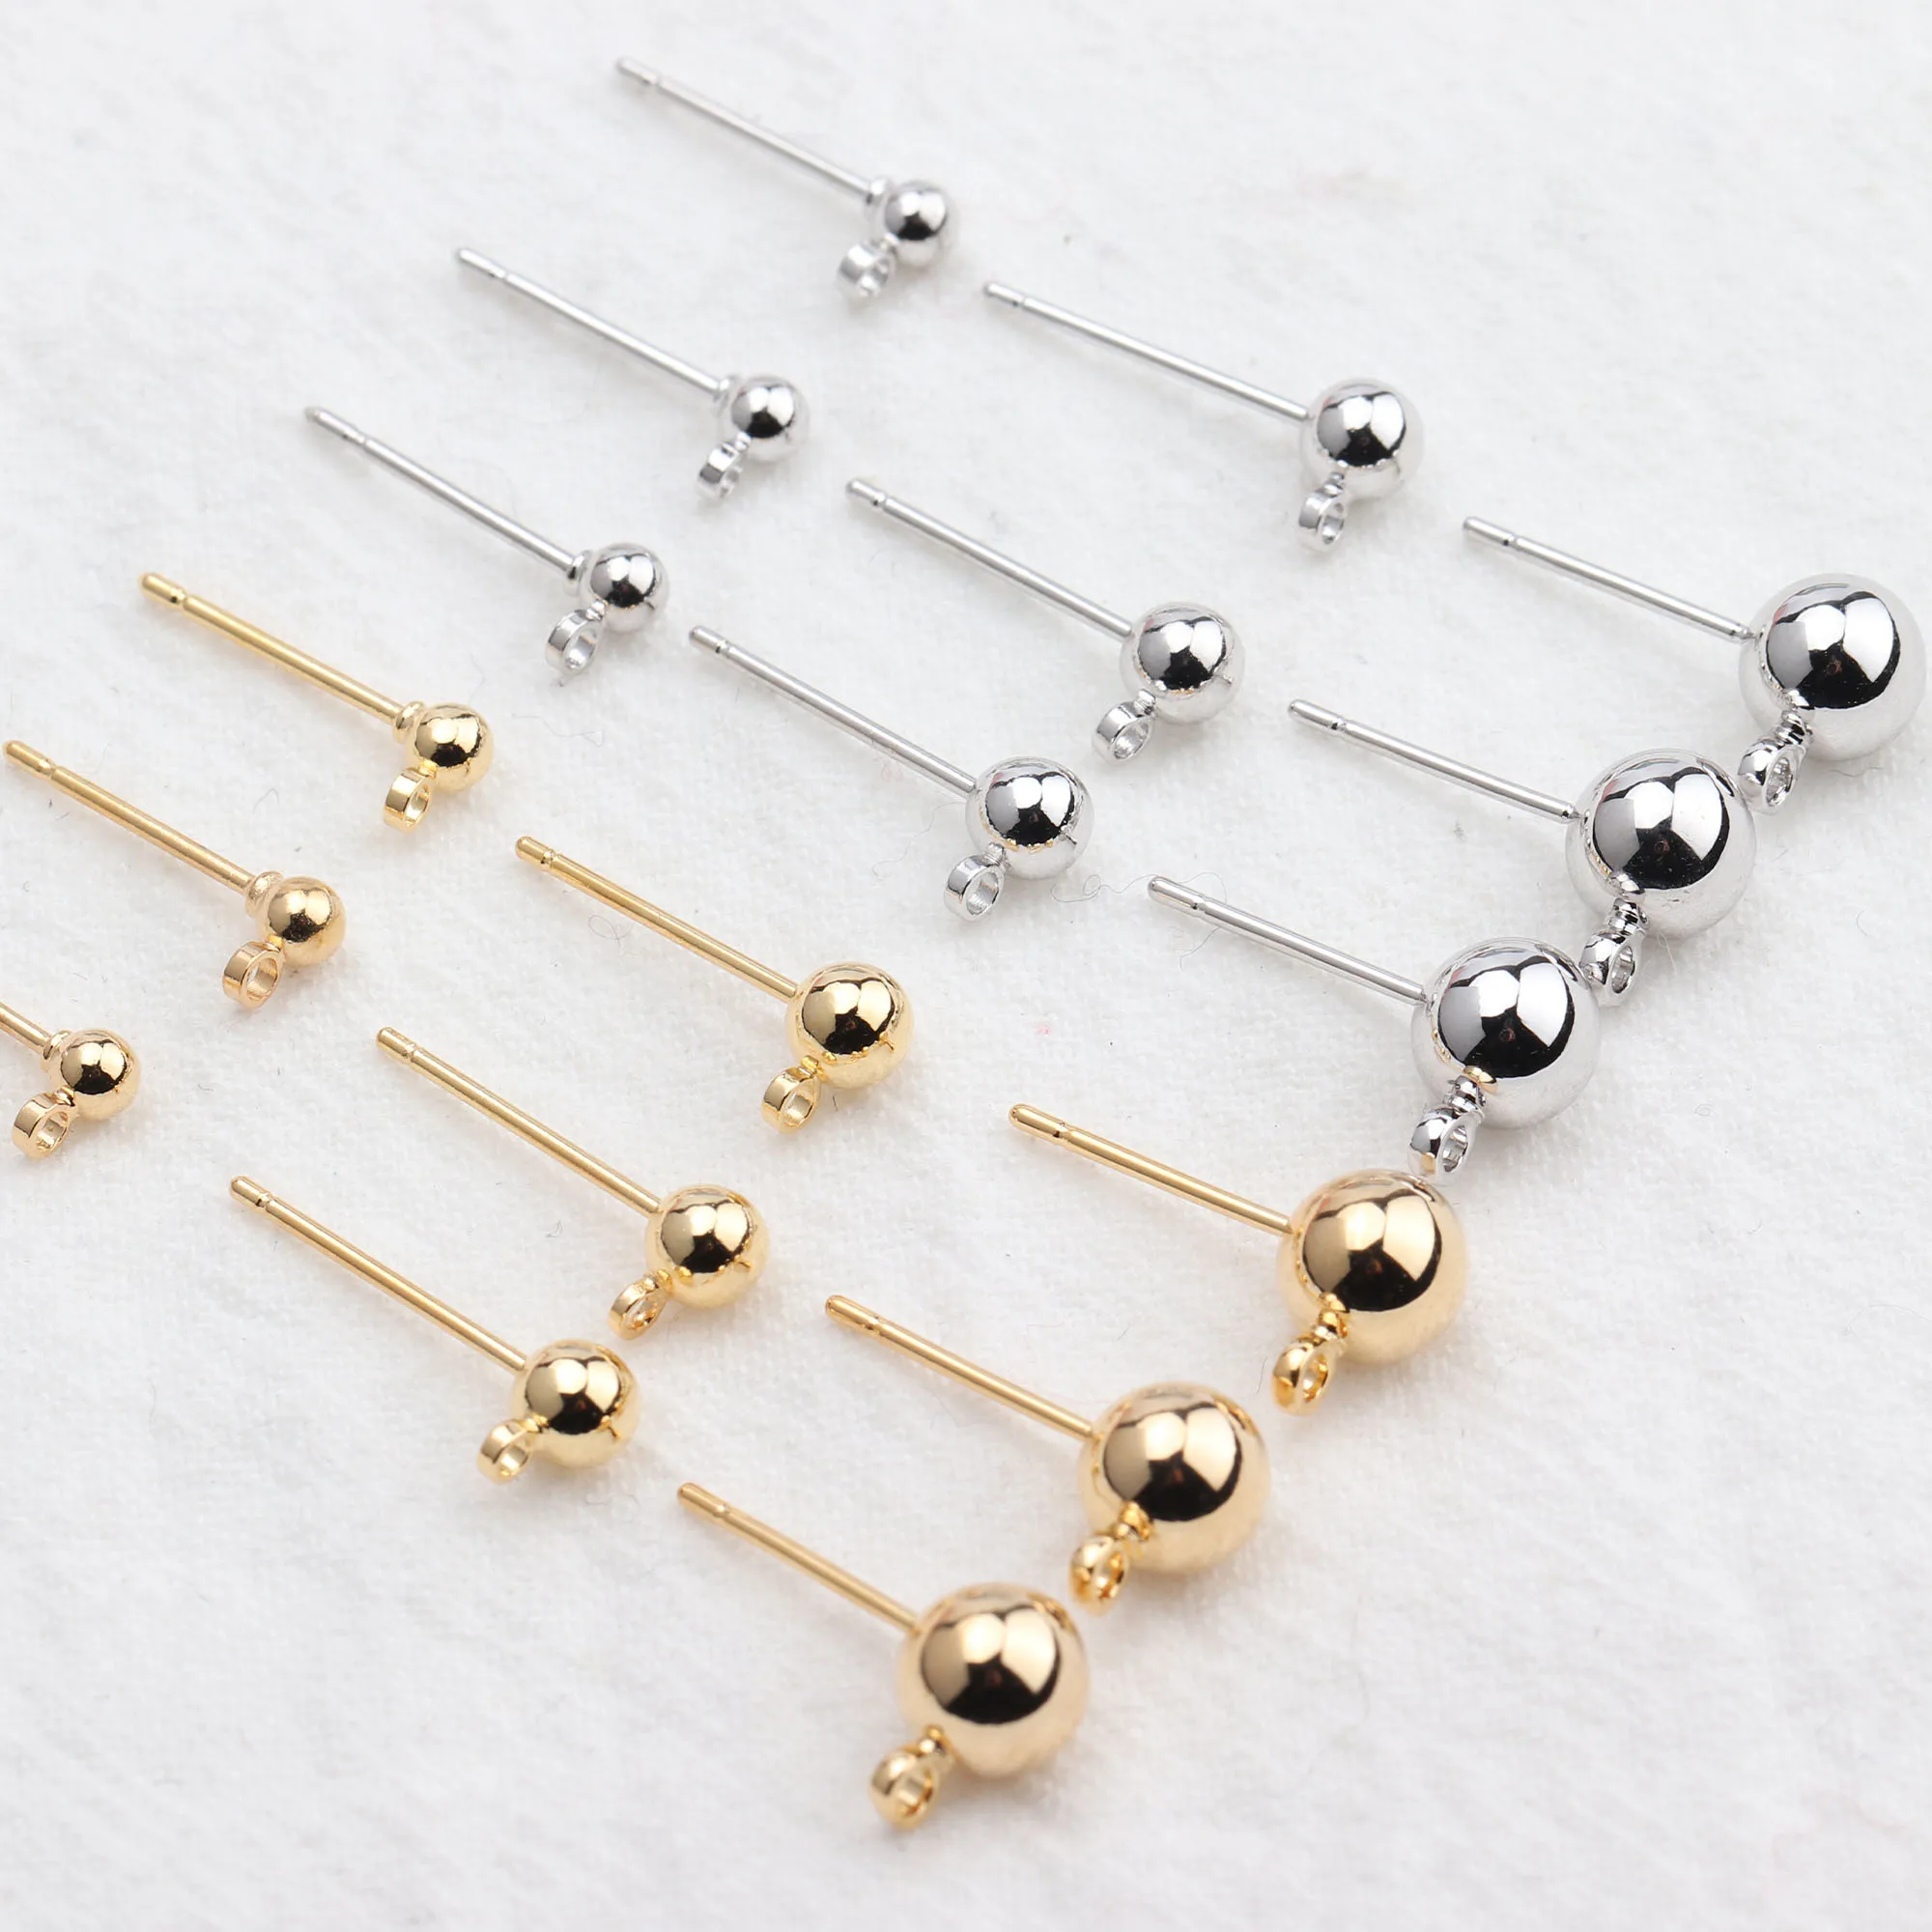 

Mini 18K Gold Plated Needles Diy Earrings Studs For Women Jewelry Findings & Components M575 100pcs/lot, Gold,silver